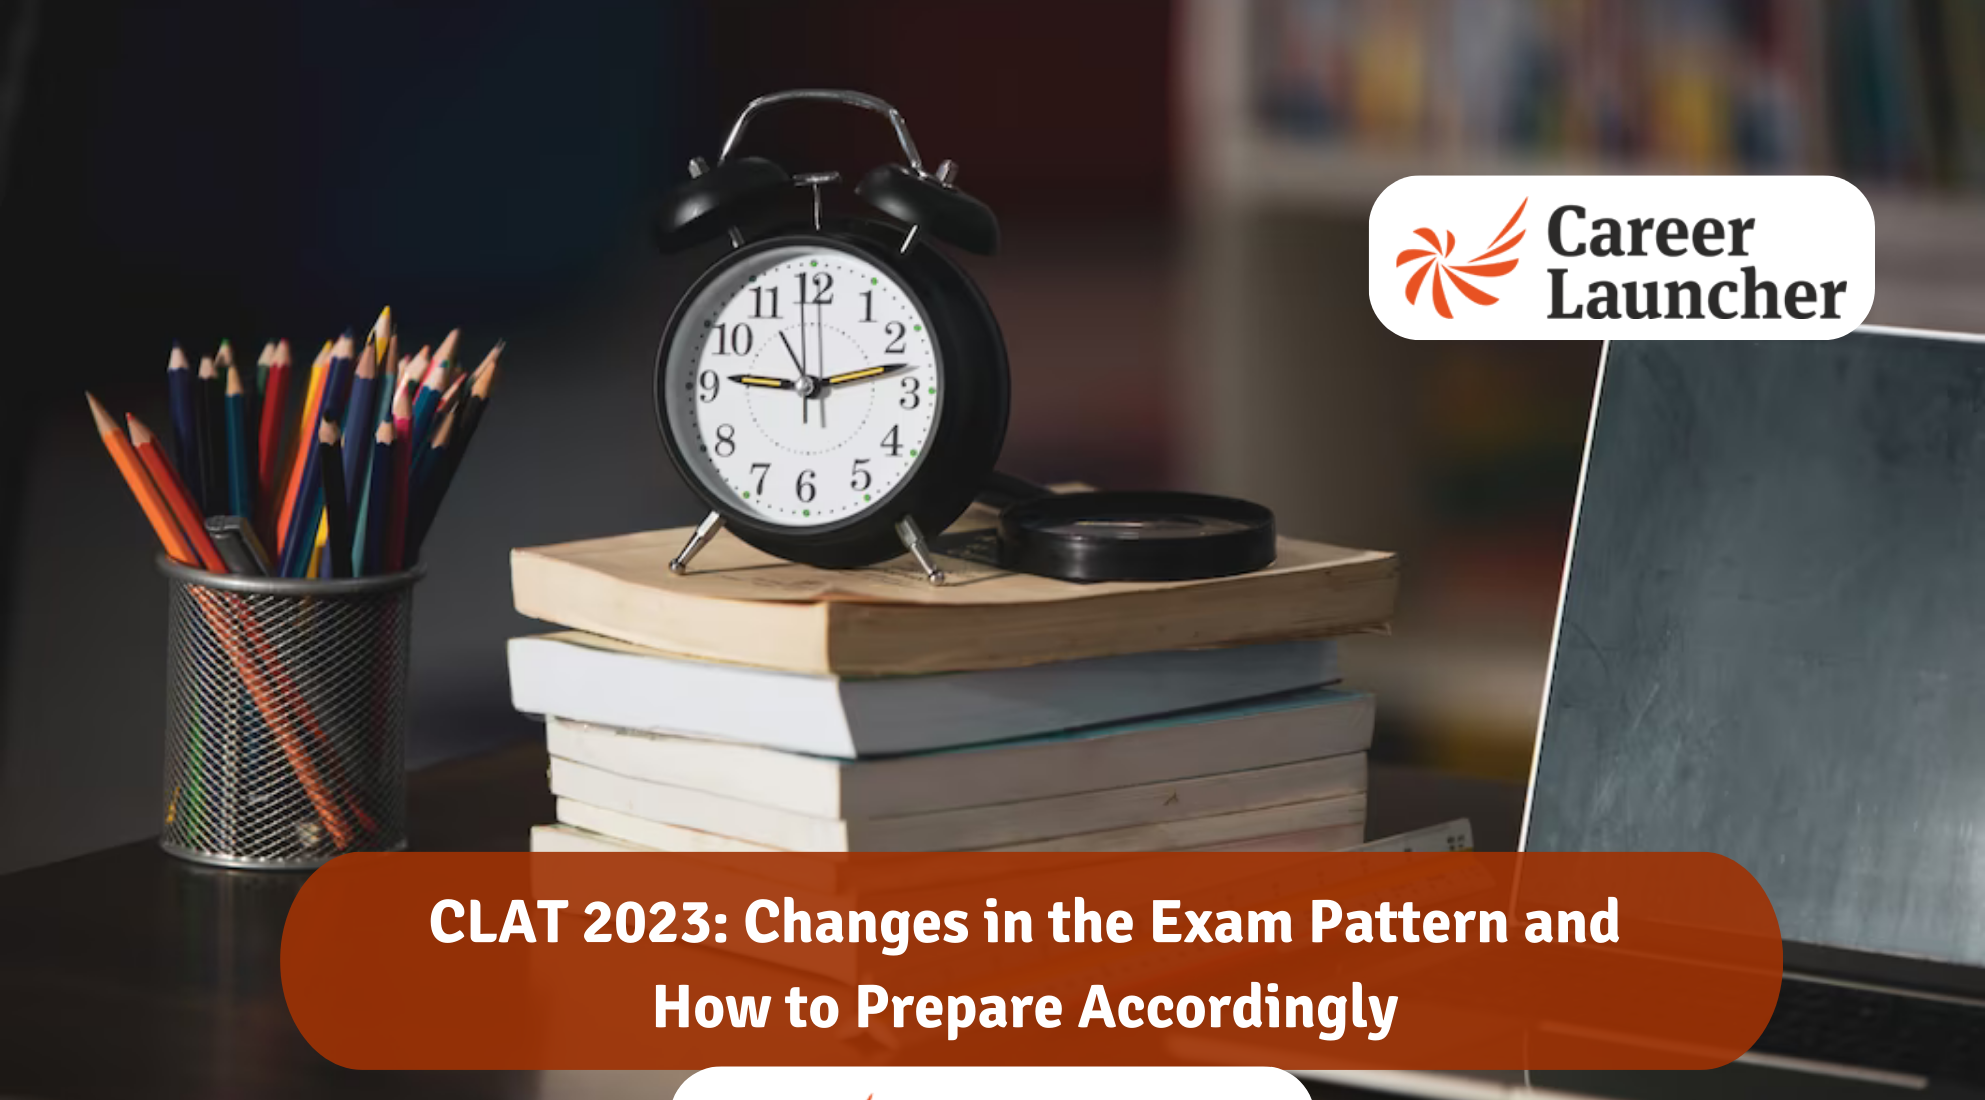 CLAT 2023: Changes in the Exam Pattern and How to Prepare Accordingly  